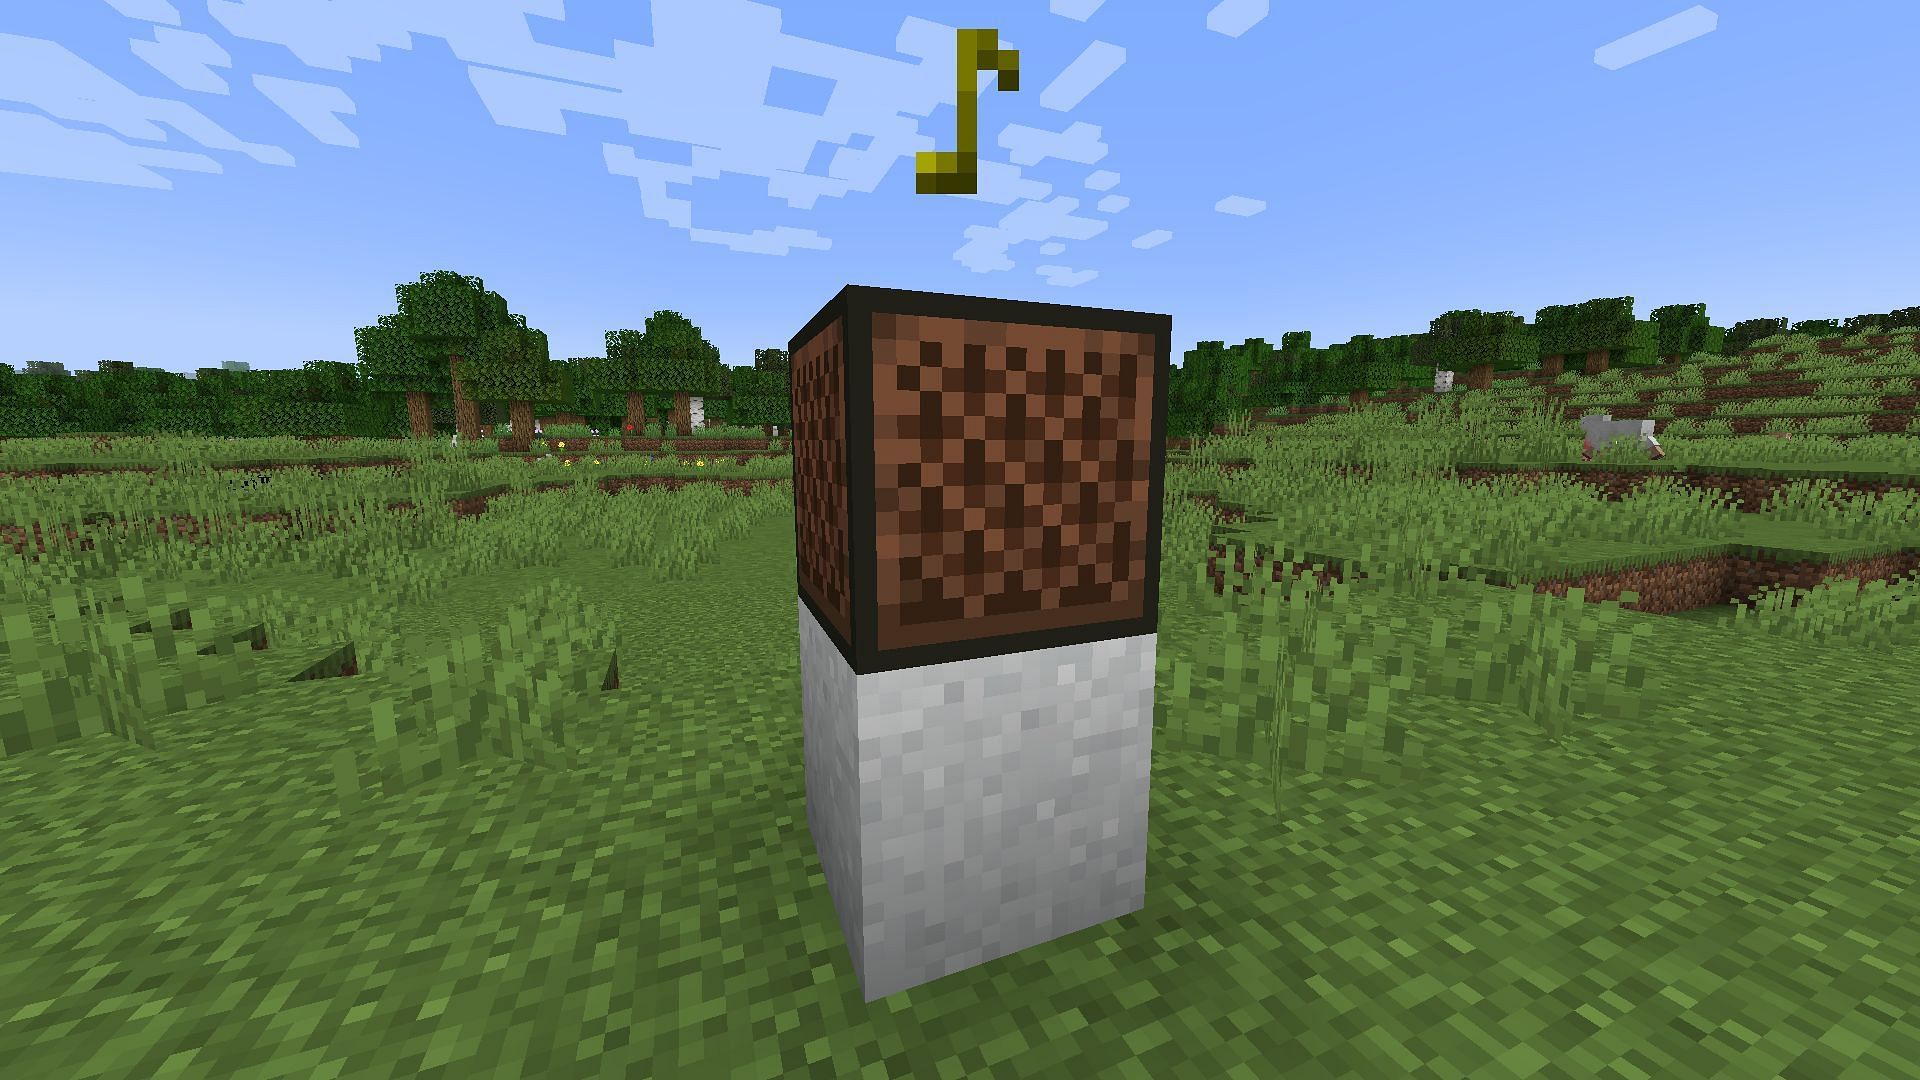 Players can place it underneath a note block to change the instrument to snare drum (Image via Minecraft 1.19 update)